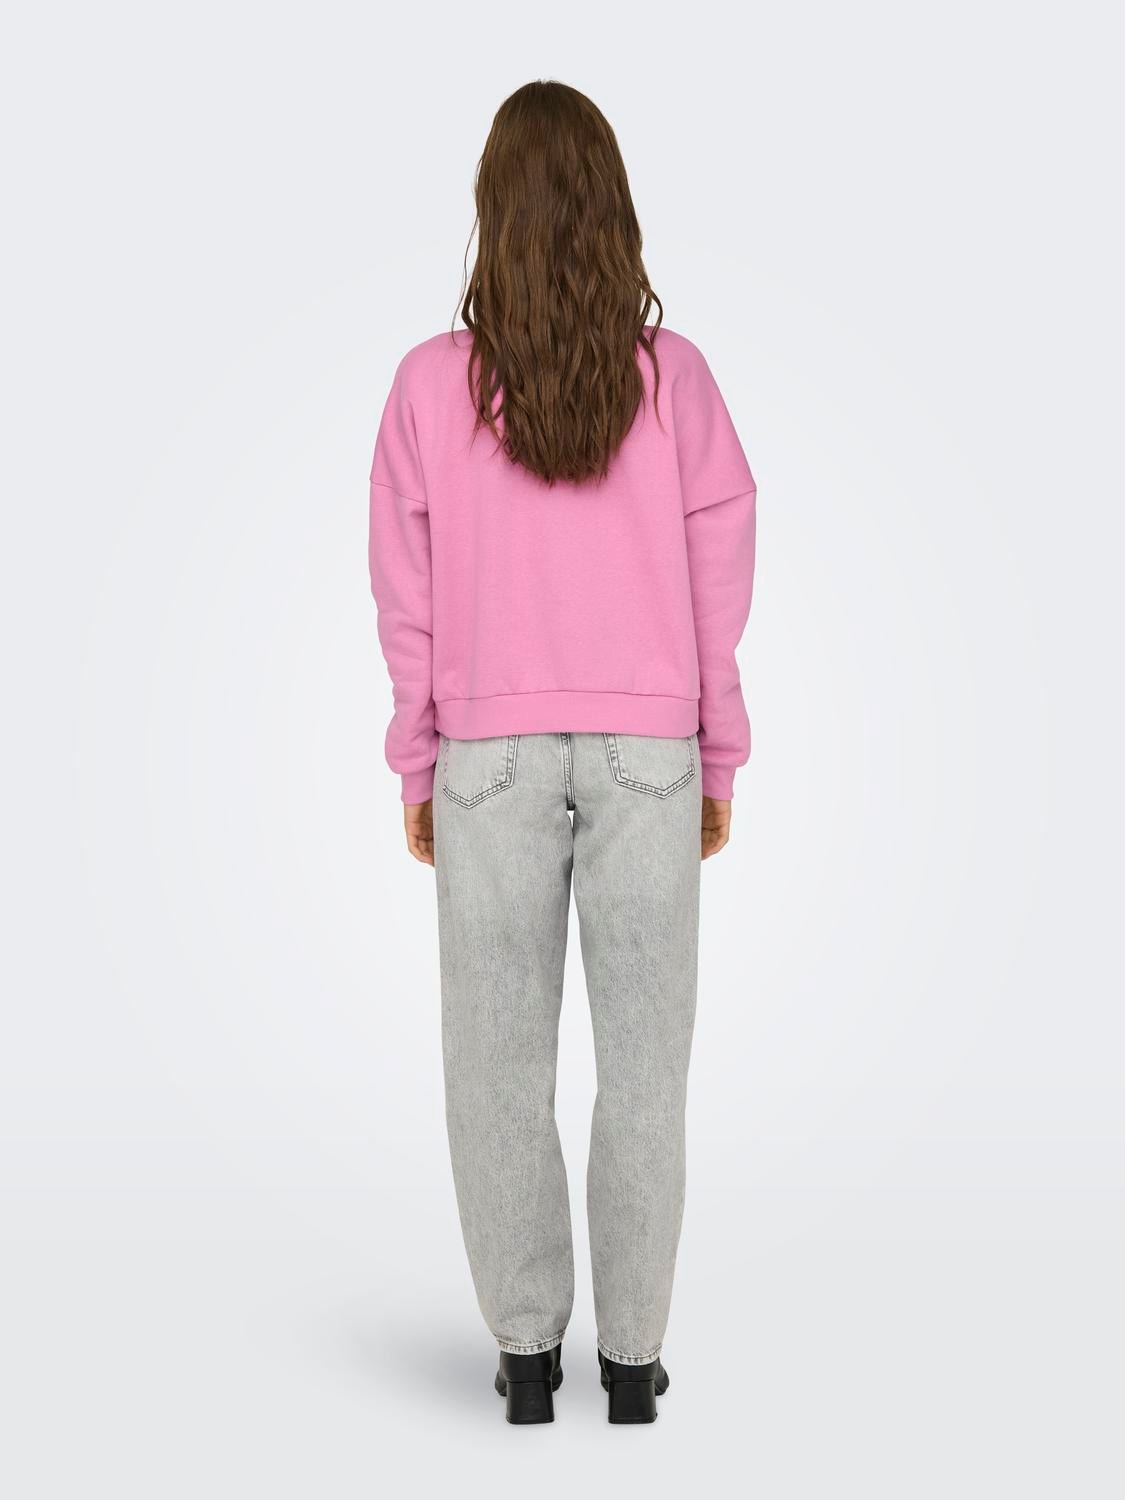 ONLY Solid color sweatshirt -Fuchsia Pink - 15321400